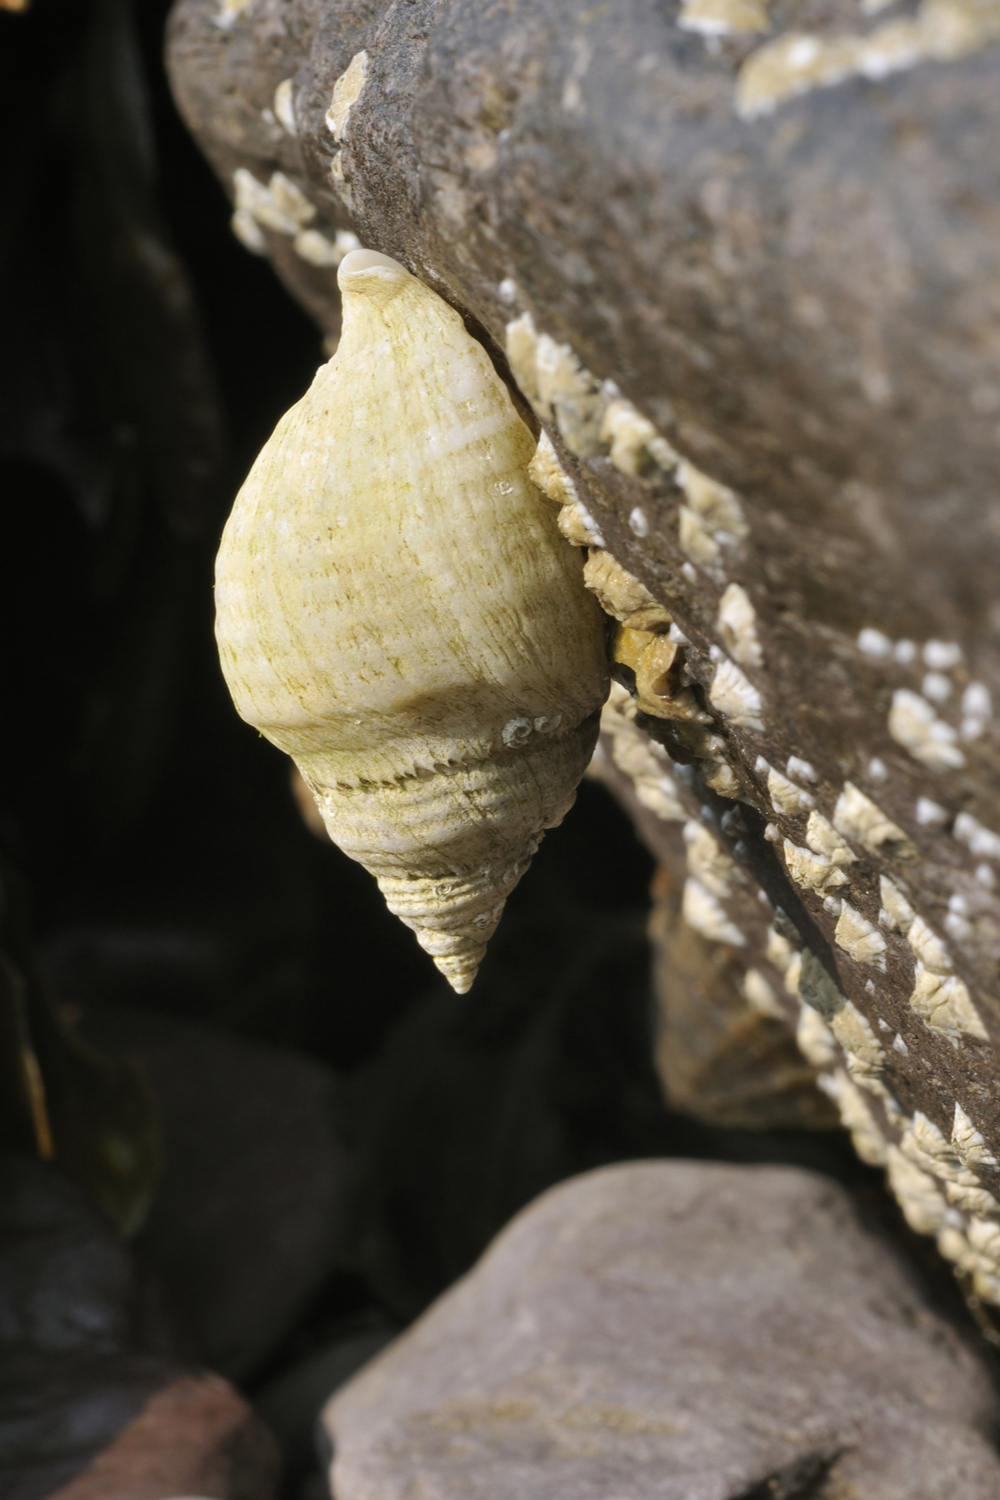 What do sea snails eat in the wild